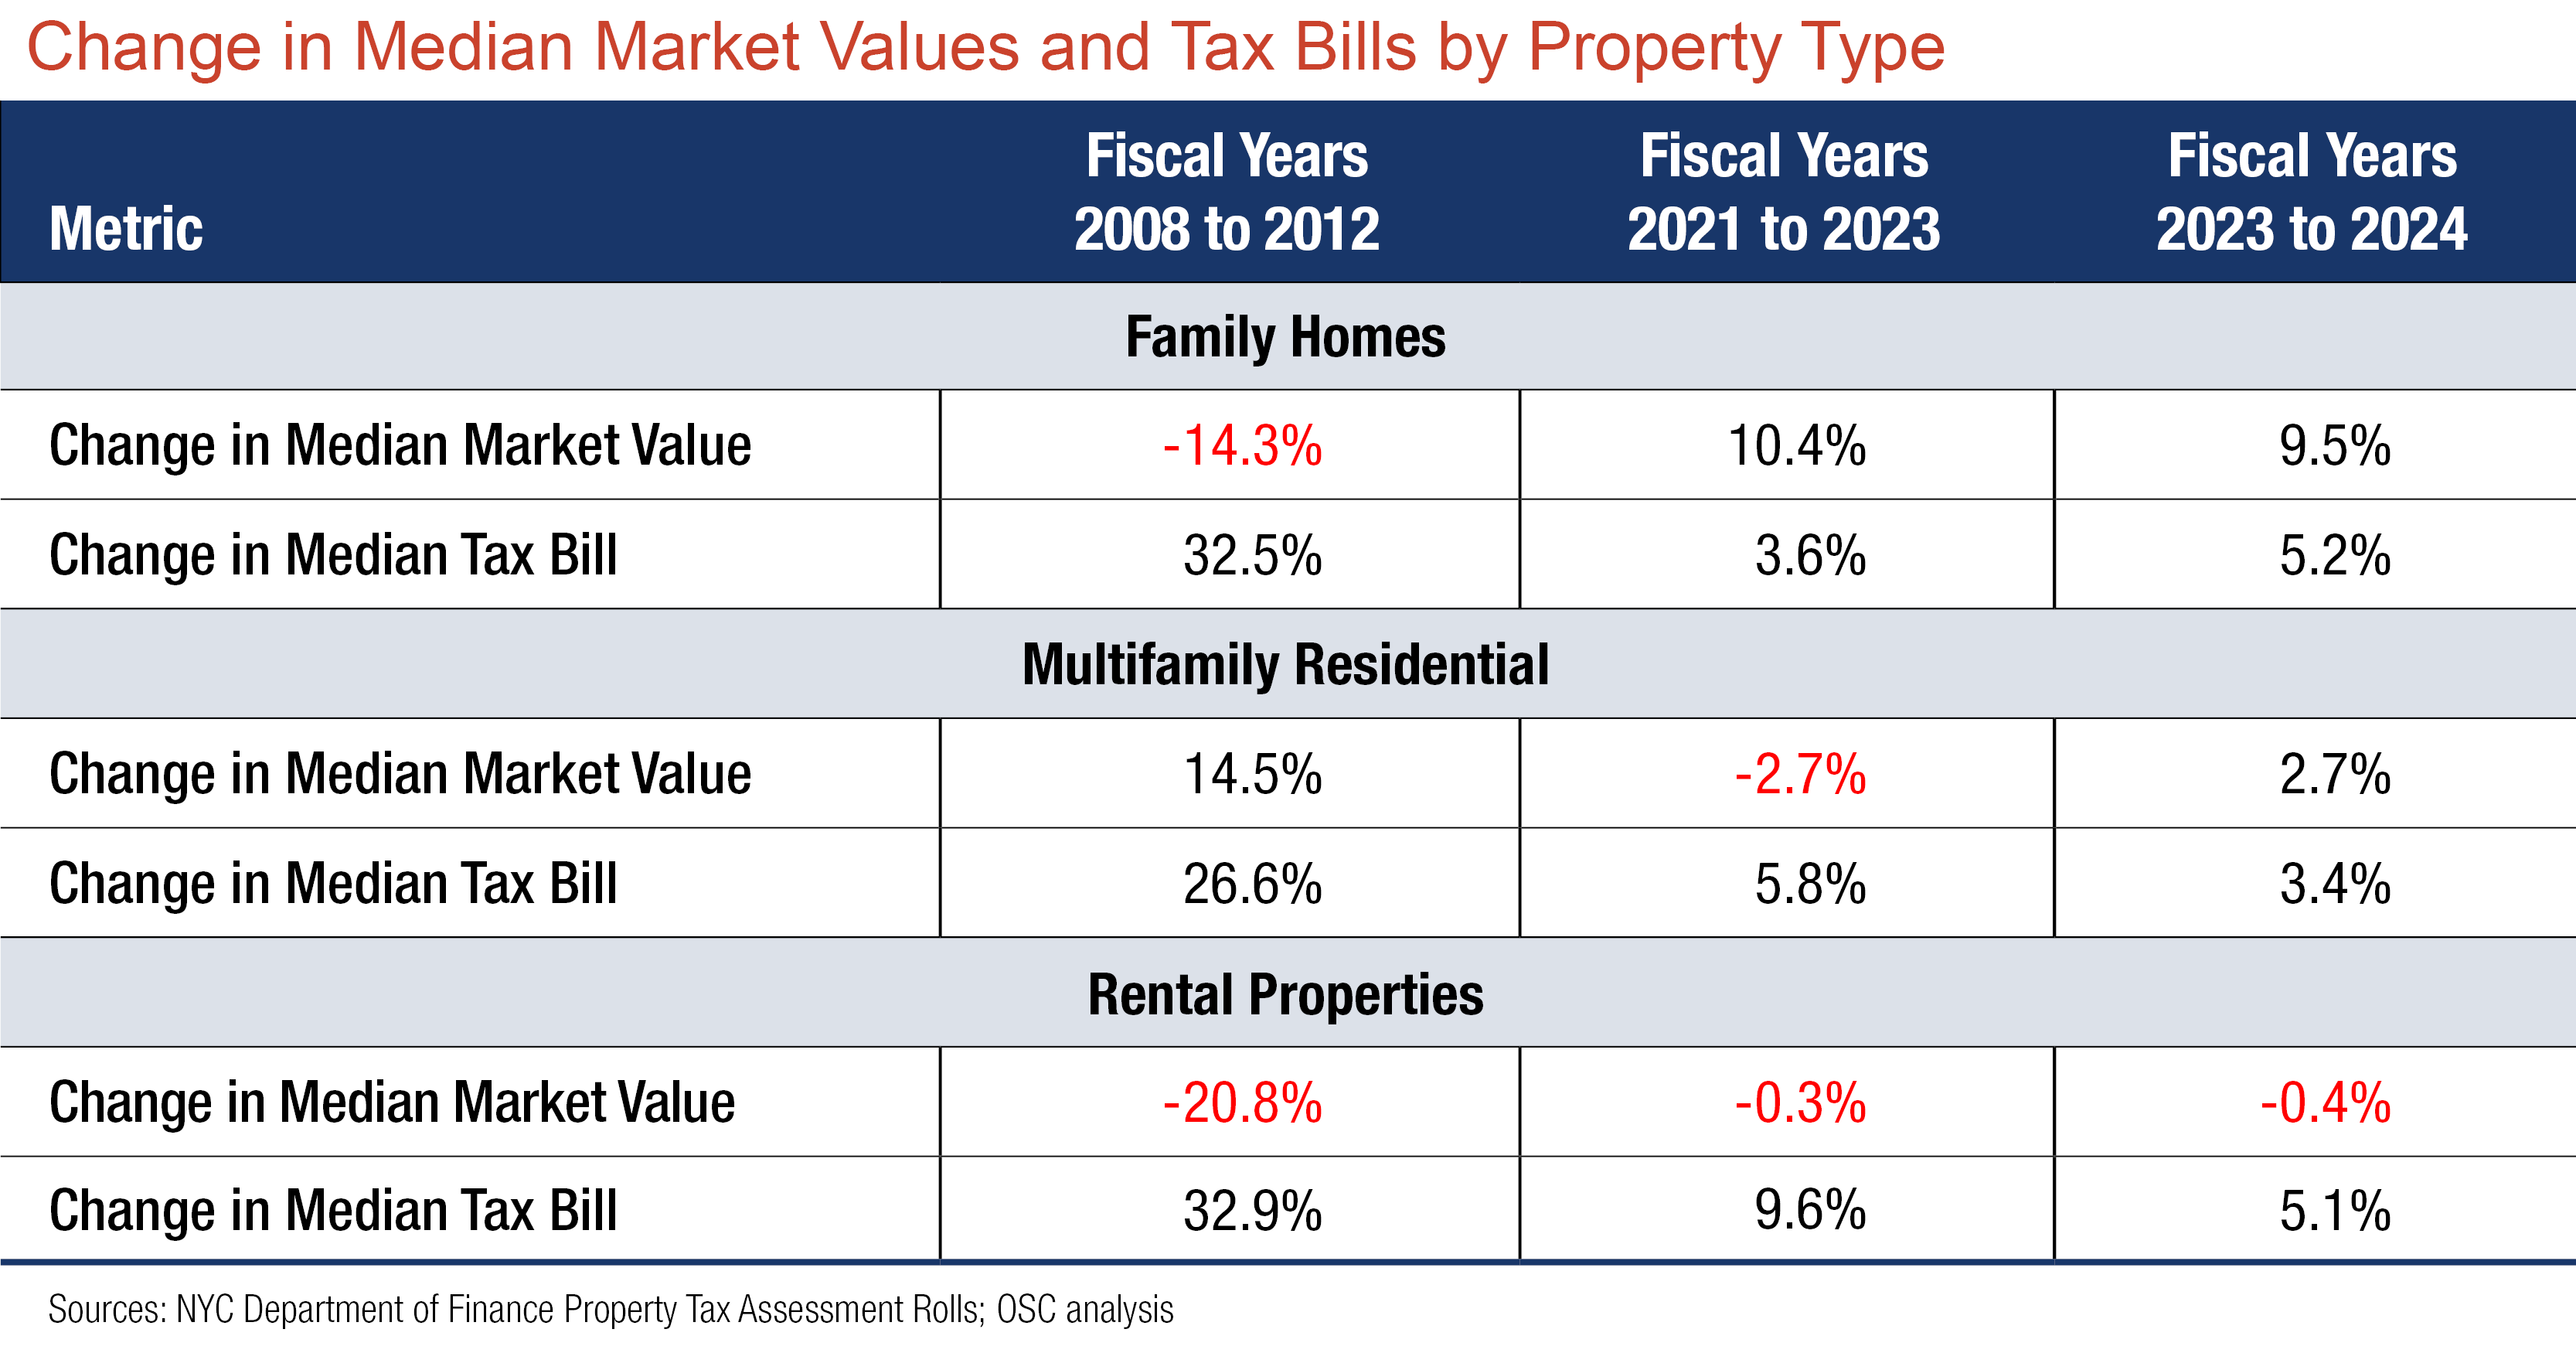 Change in Median Market Values and Tax Bills by Property Type